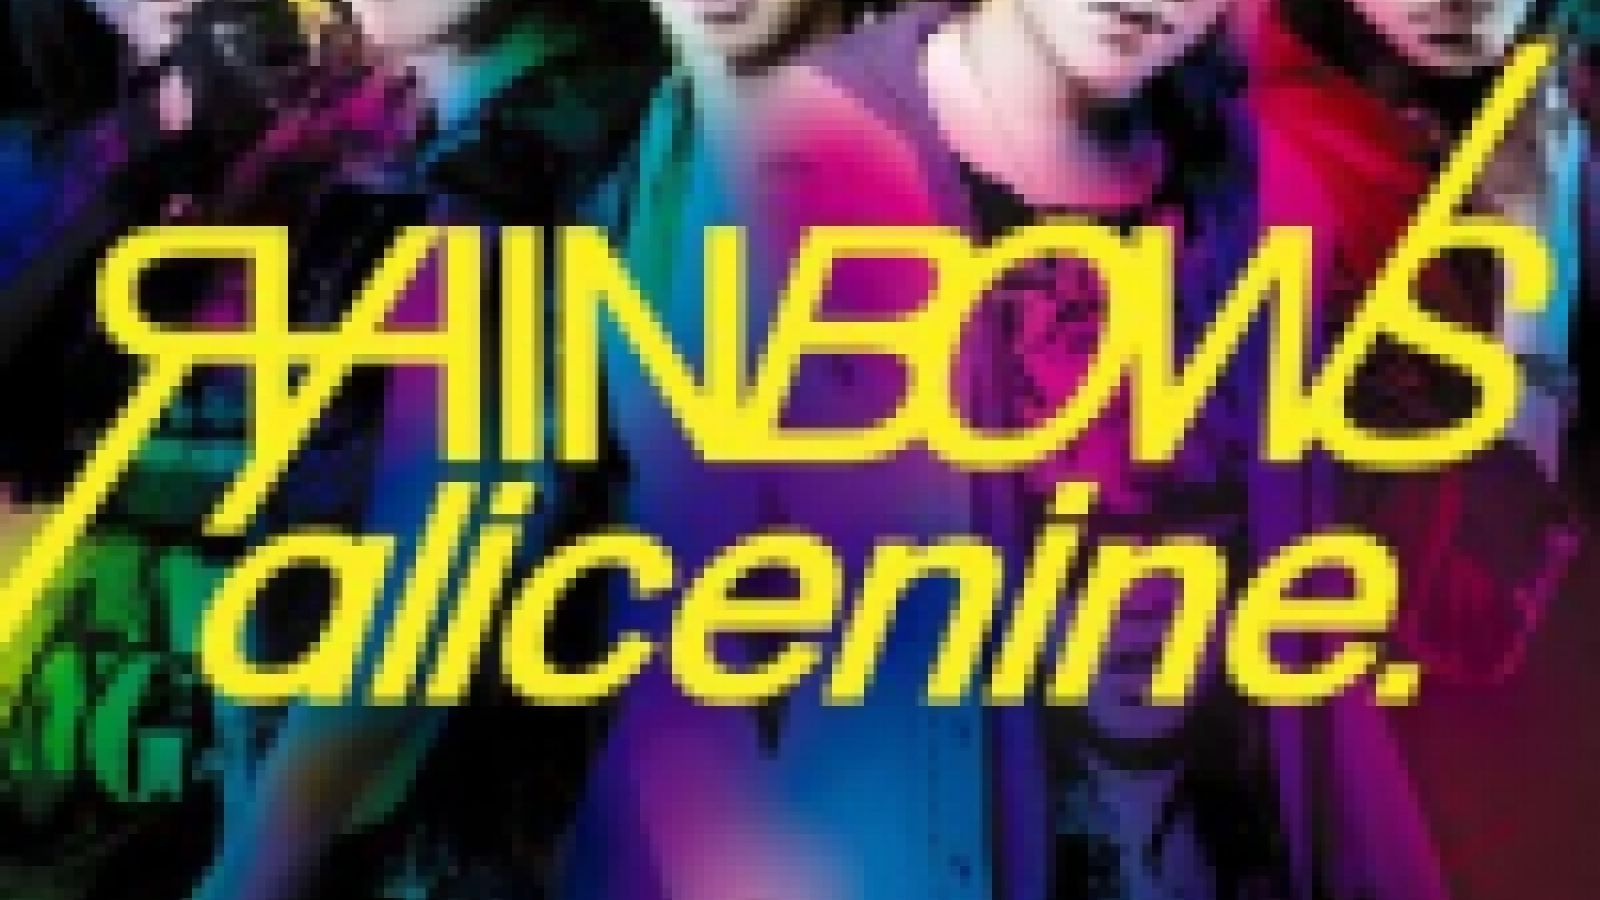 alice nine.'s RAINBOWS © 2008 Zy.connection Inc. All Rights Reserved.